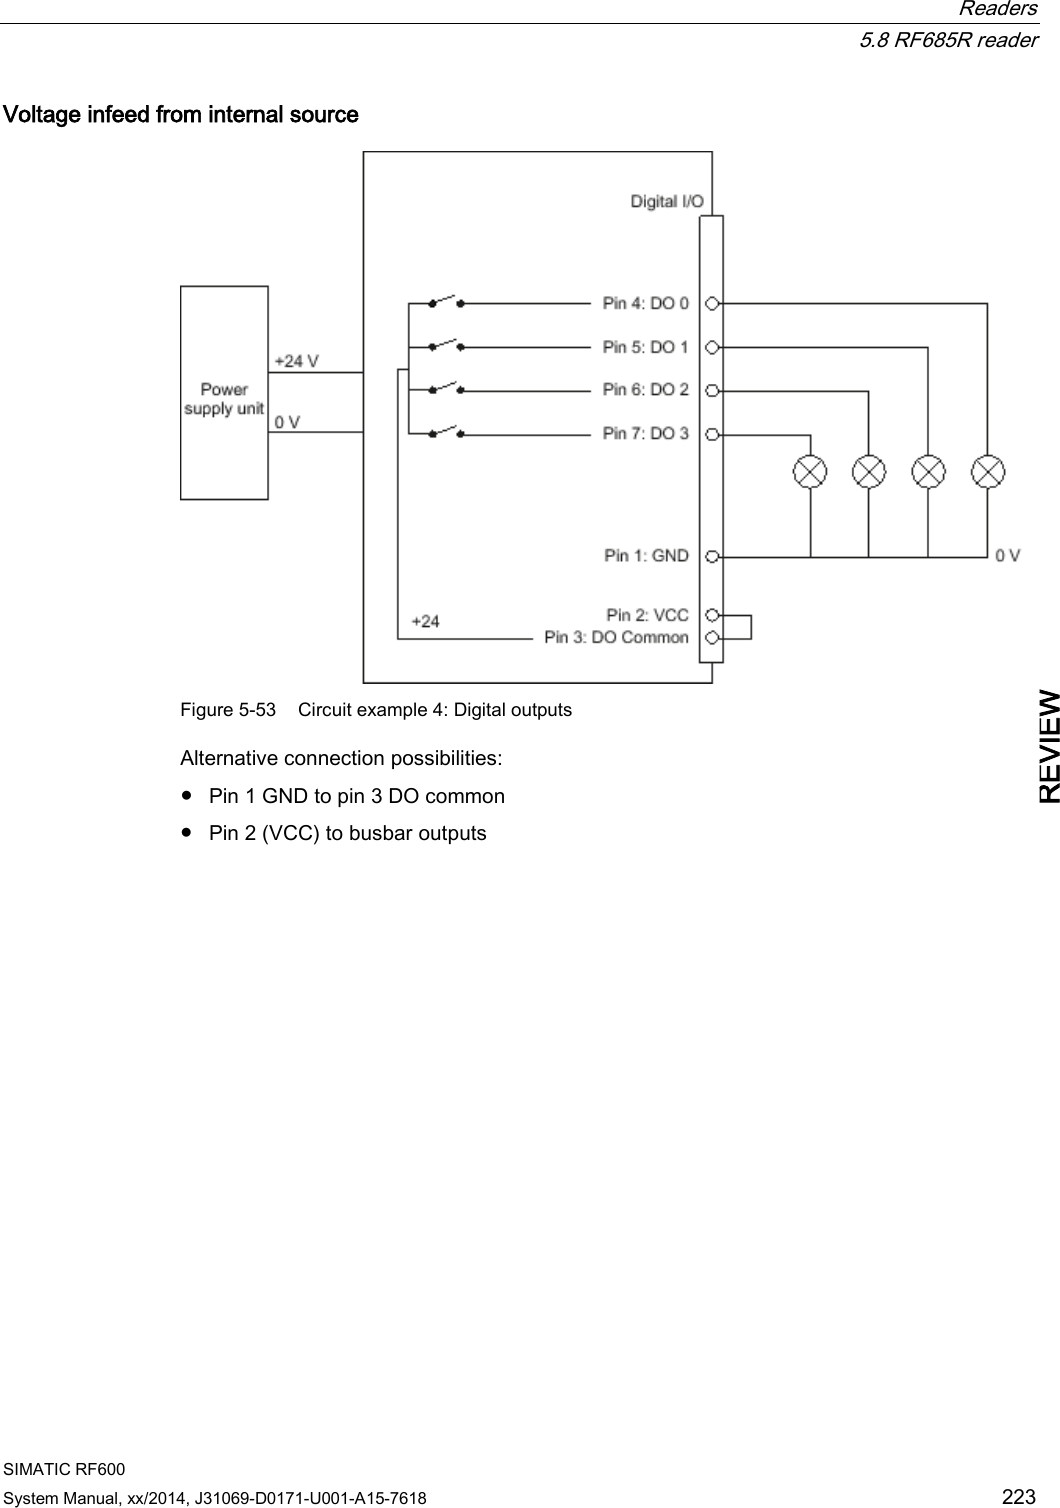  Readers  5.8 RF685R reader SIMATIC RF600 System Manual, xx/2014, J31069-D0171-U001-A15-7618 223 REVIEW Voltage infeed from internal source  Figure 5-53 Circuit example 4: Digital outputs Alternative connection possibilities: ● Pin 1 GND to pin 3 DO common ● Pin 2 (VCC) to busbar outputs 